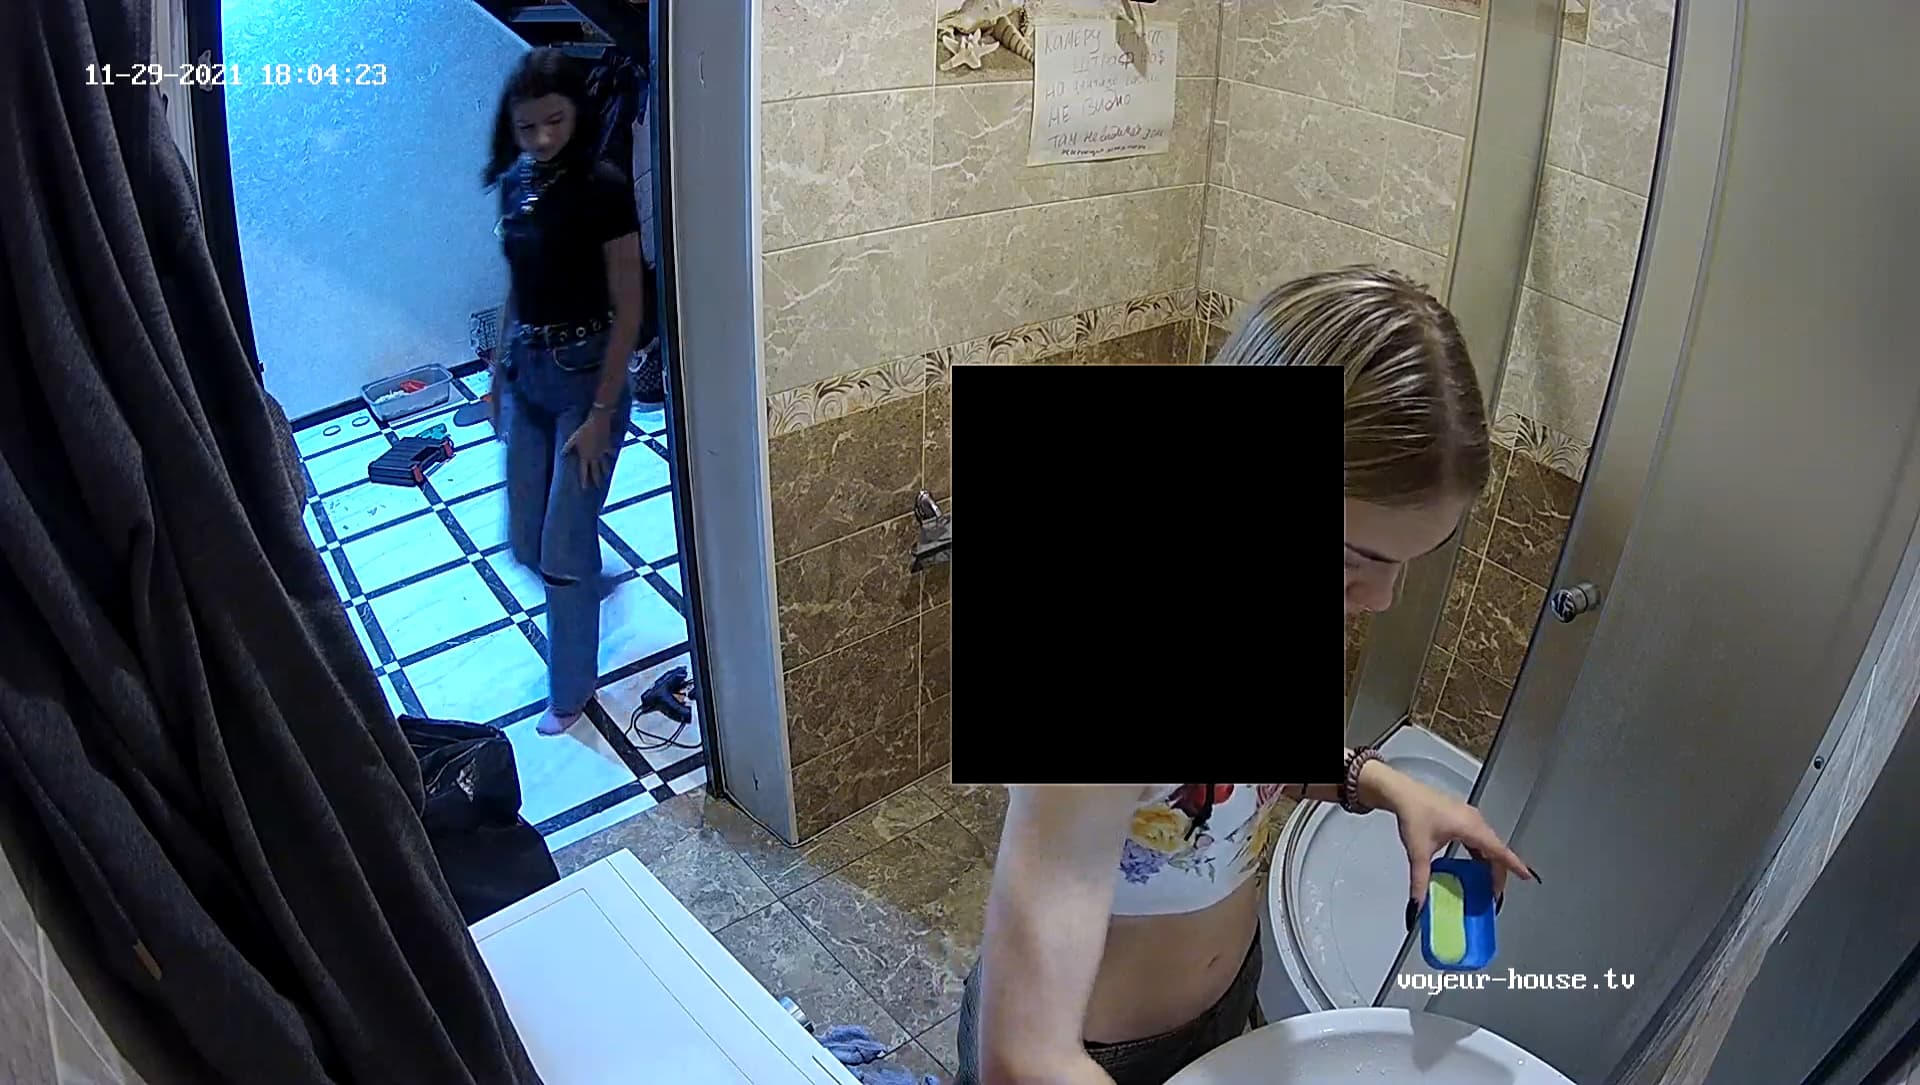 Should toilet cams be banned? - Your Feedback and Ideas